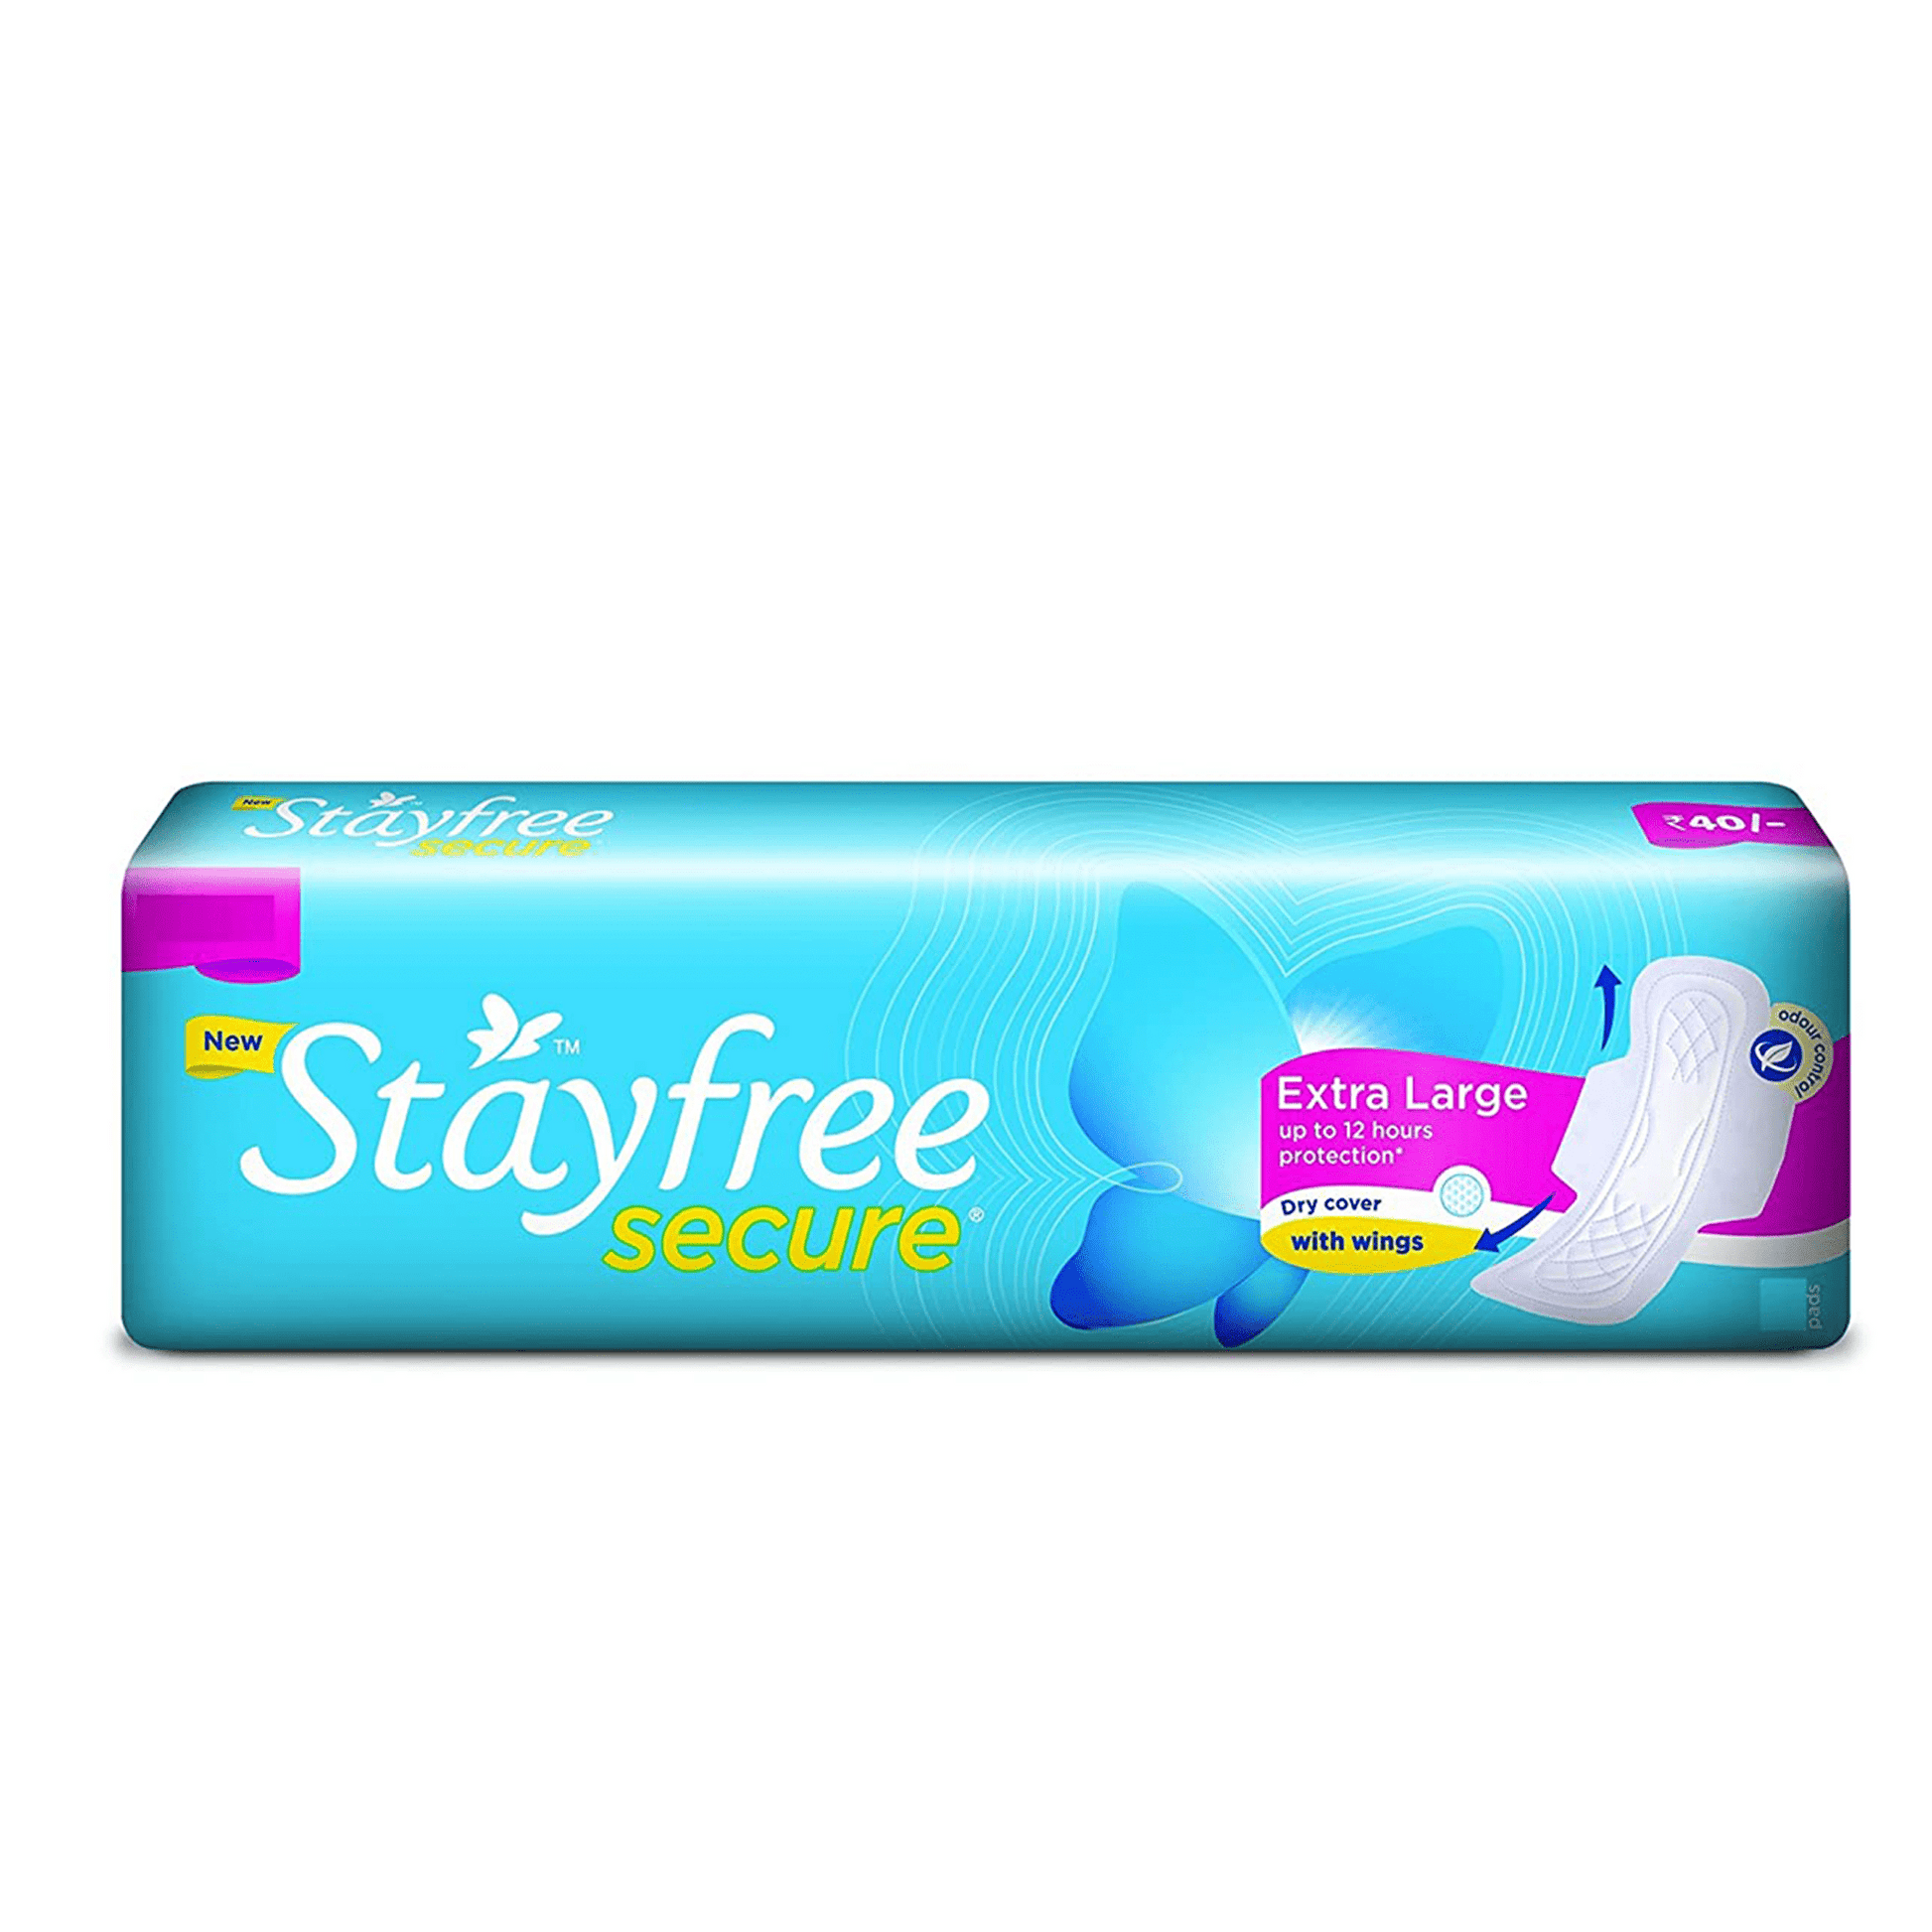 Stayfree Secure - XL Dry Cover Sanitary Pads with Wings.